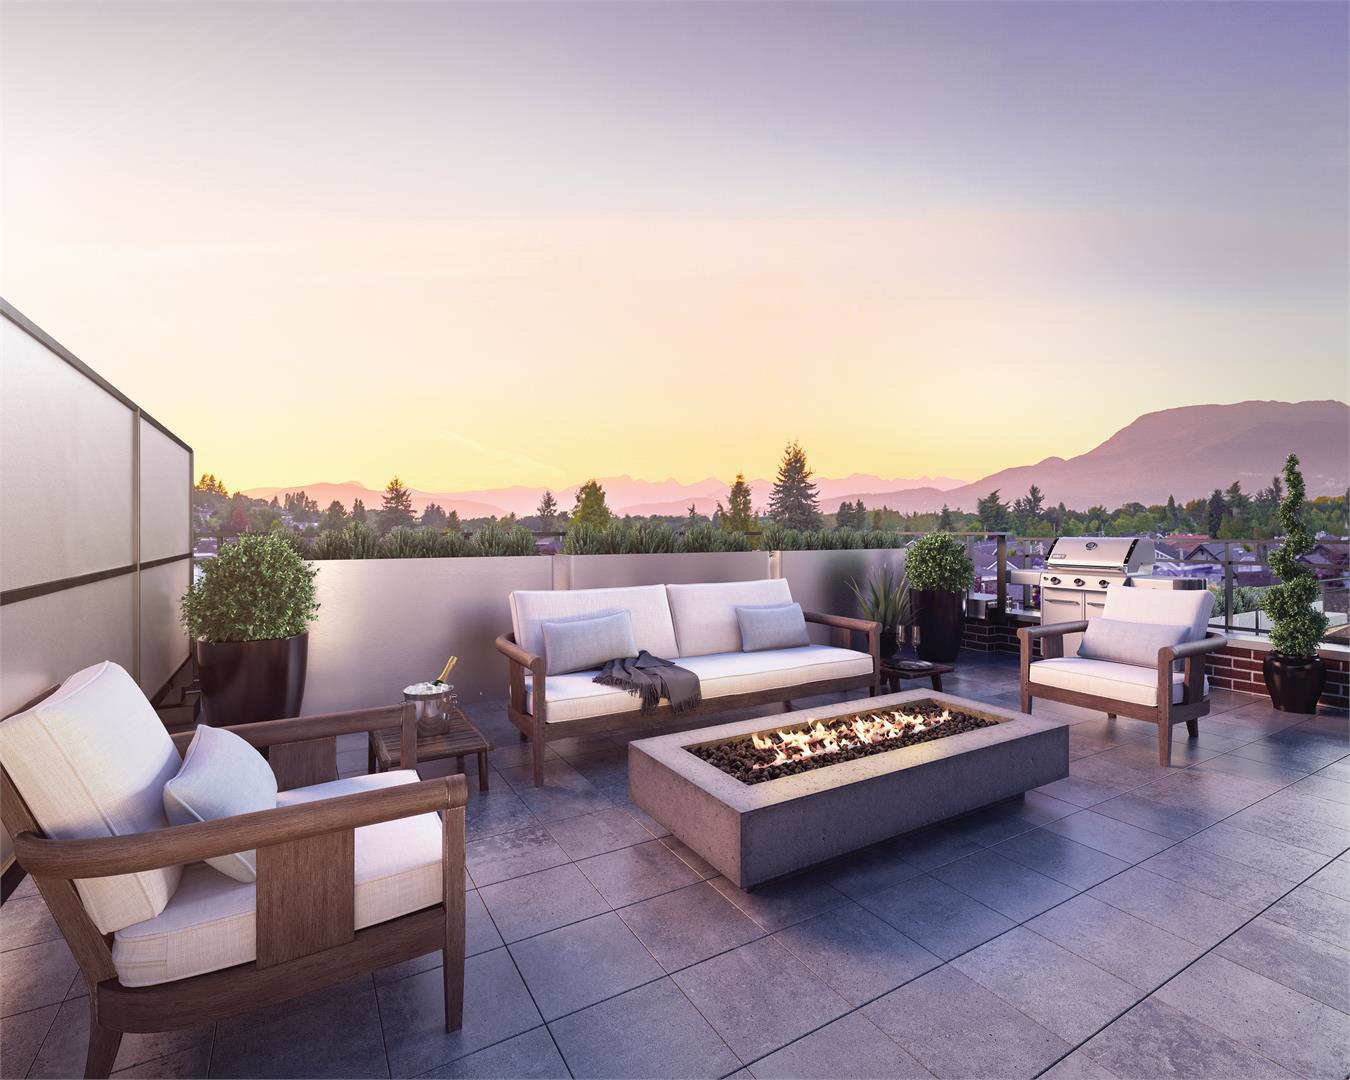 Each Westbury townhome has a private rooftop patio.